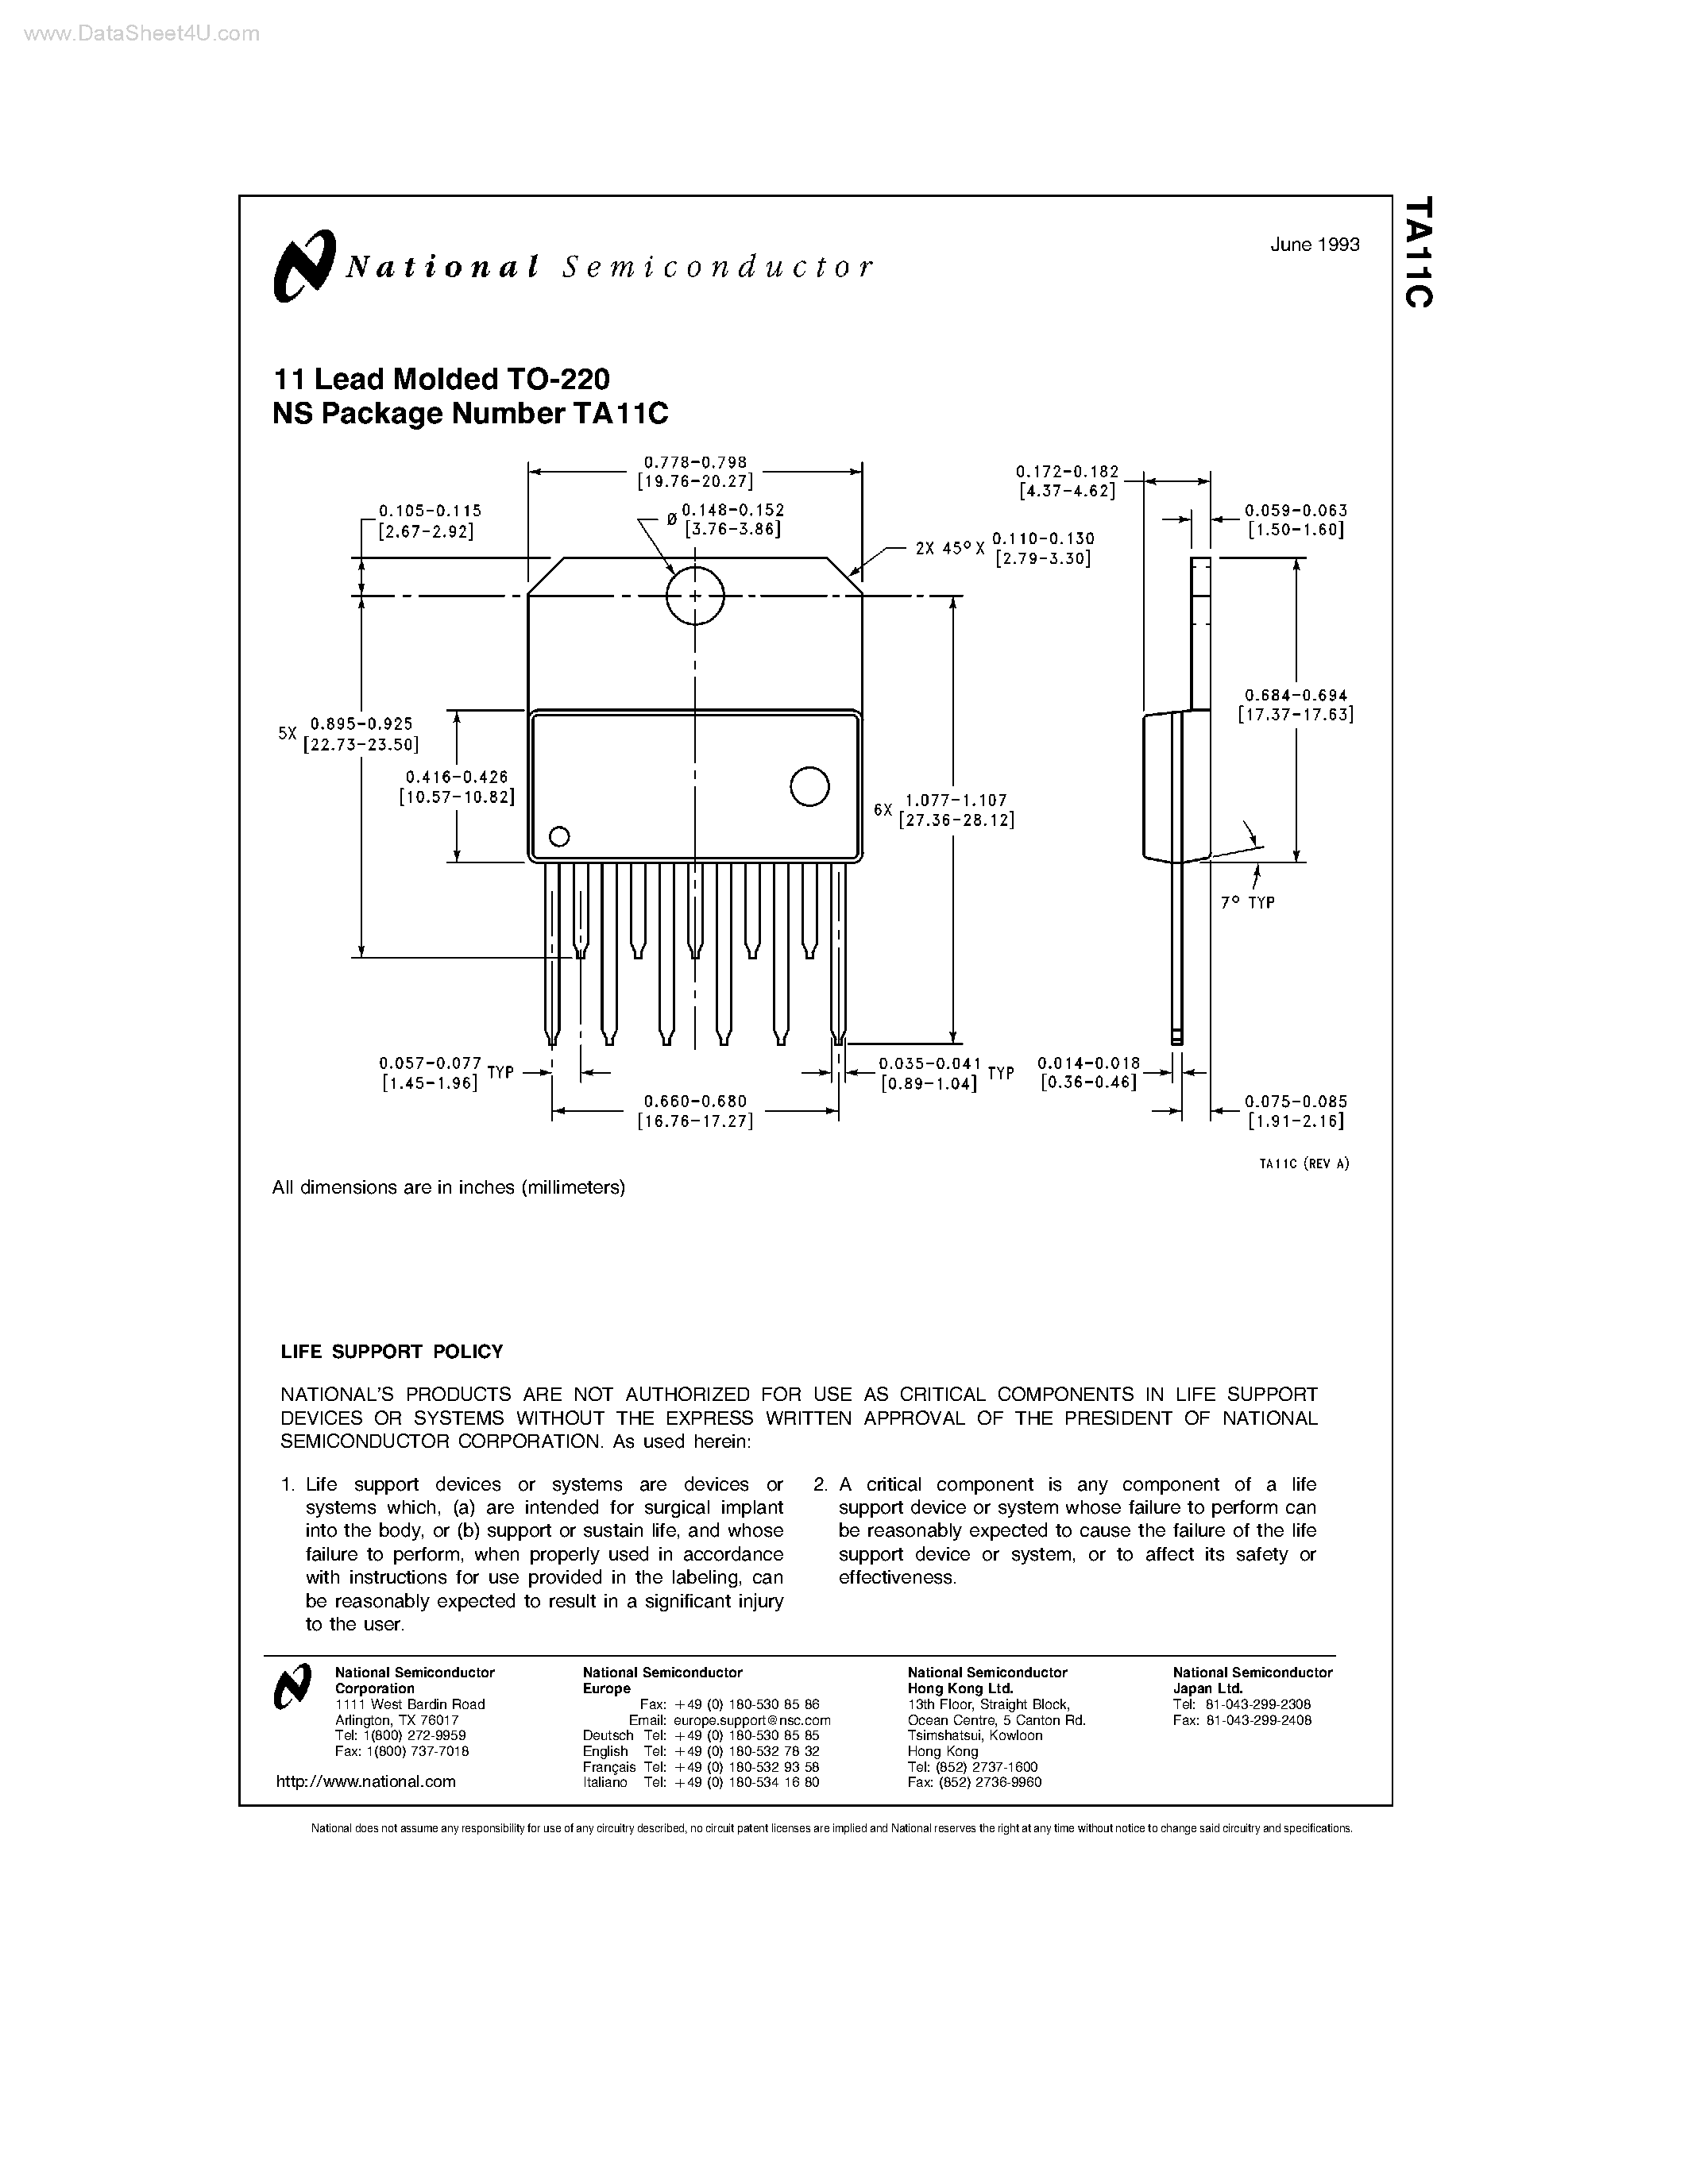 Datasheet TA11C - 11 Lead Molded TO-220 NS Package page 1